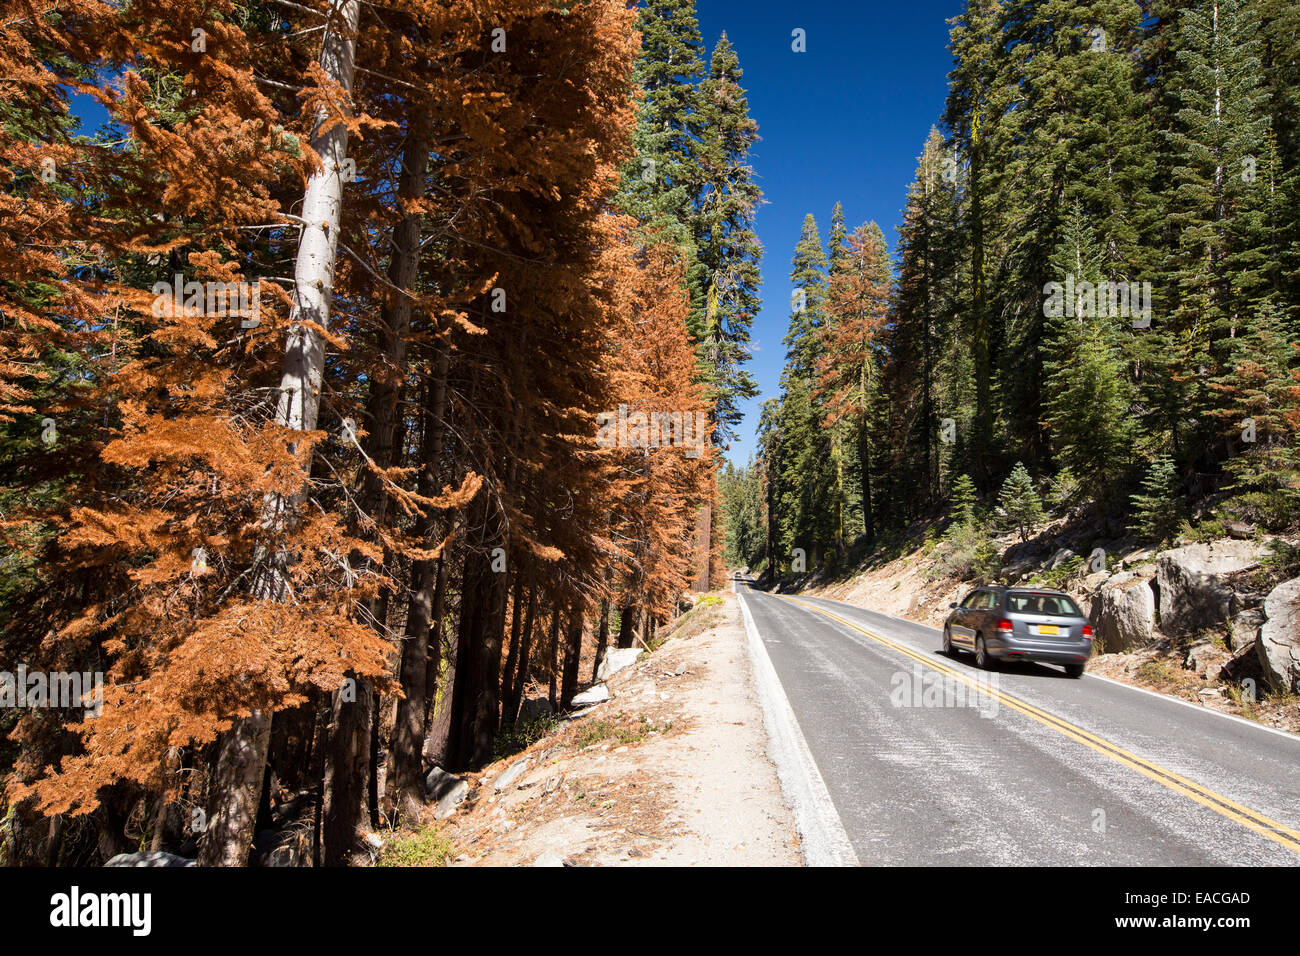 Wildfire damage in Yosemite National Park, California, USA. Most of California is in exceptional drought, the highest classification of drought, which has lead to an increasing number of wild fires. Stock Photo